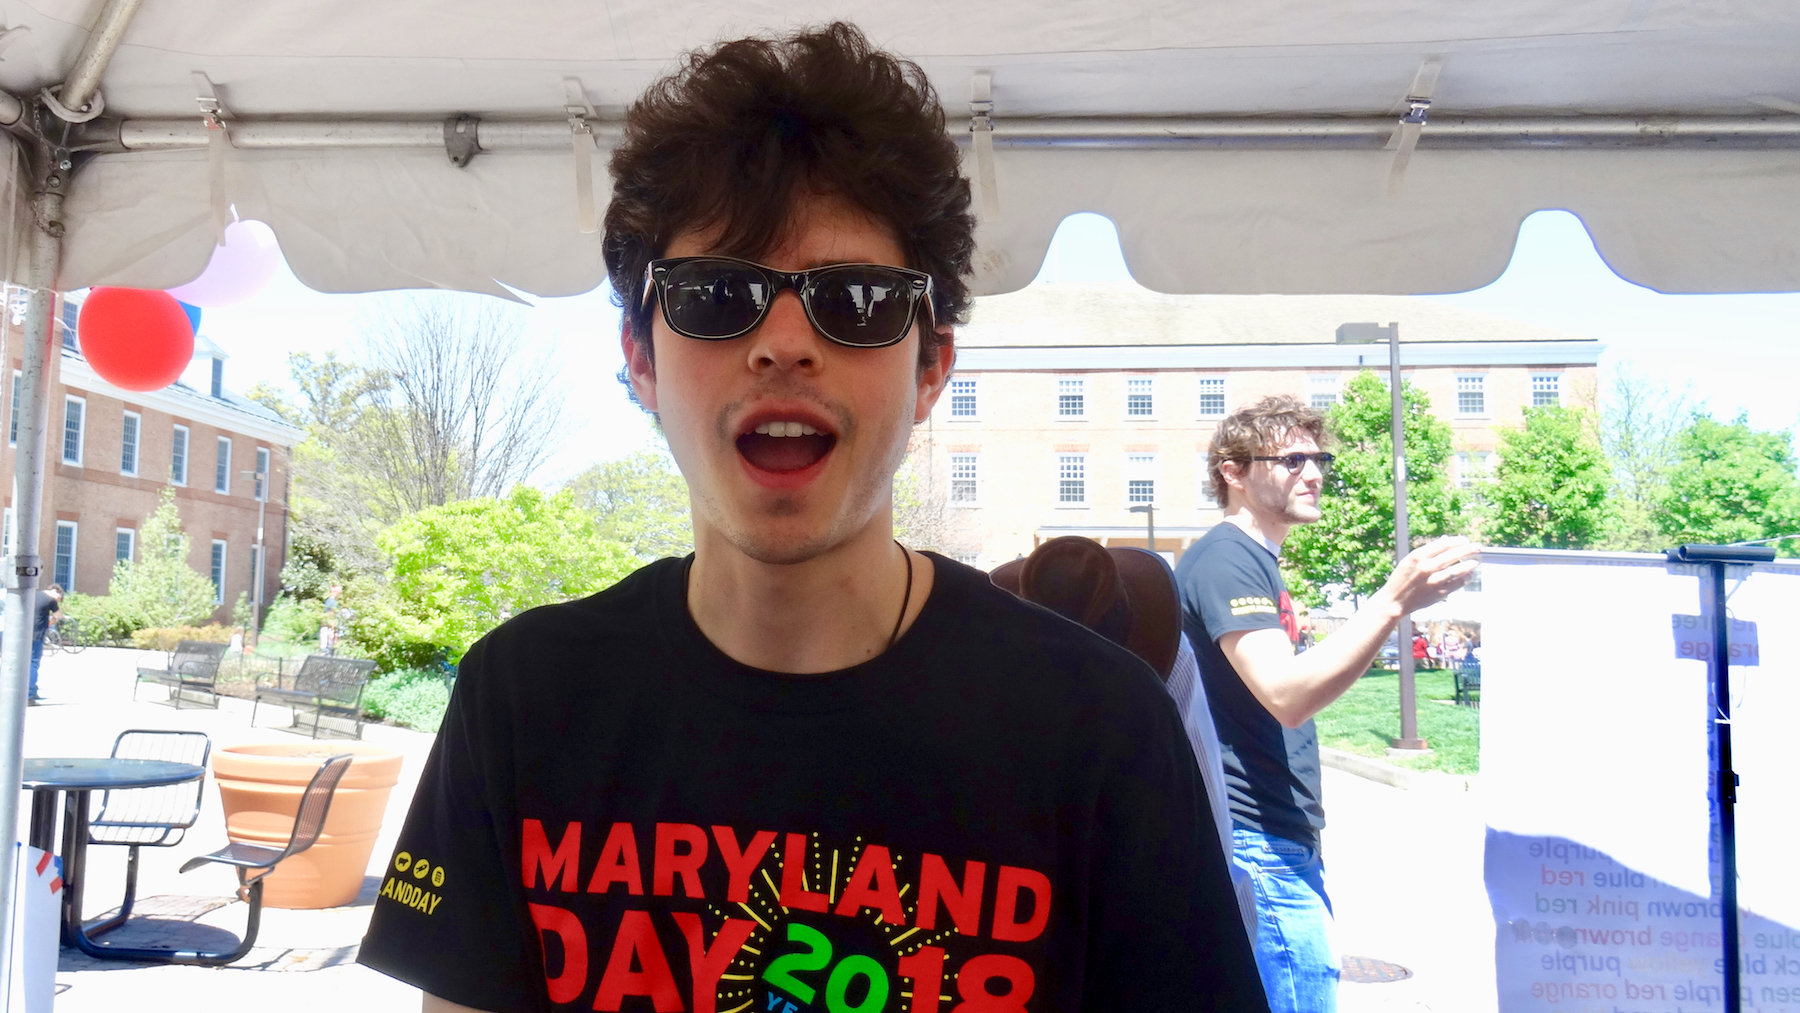 Rodrigo Ranero, a PhD student in Linguistics, wearing black sunglasses, wearing a Maryland Day t-shirt, looking at the camera with mouth open